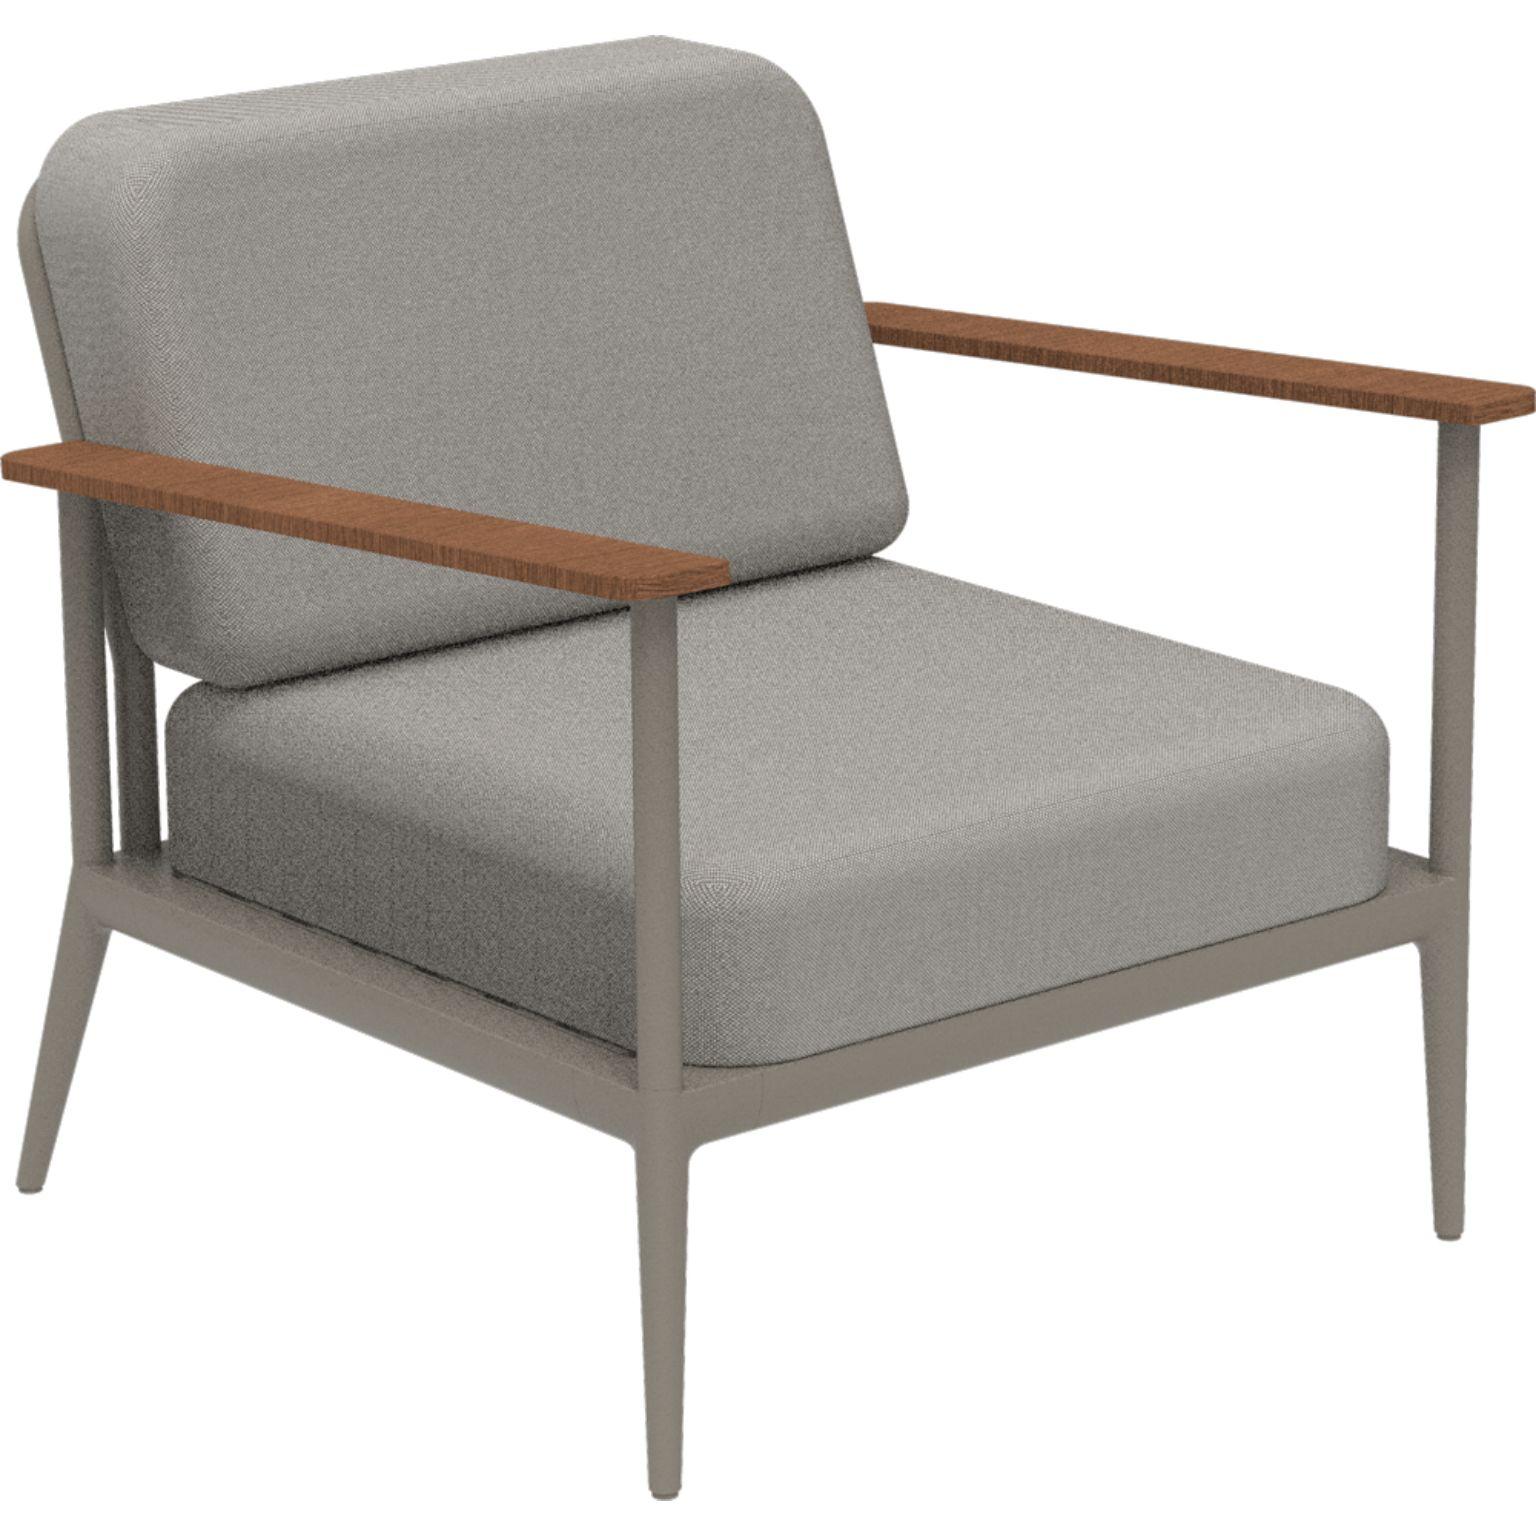 Nature cream longue chair by MOWEE
Dimensions: D85 x W83 x H81 cm (seat height 42 cm).
Material: Aluminum, upholstery and Iroko Wood.
Weight: 20 kg.
Also available in different colors and finishes.

An unmistakable collection for its beauty